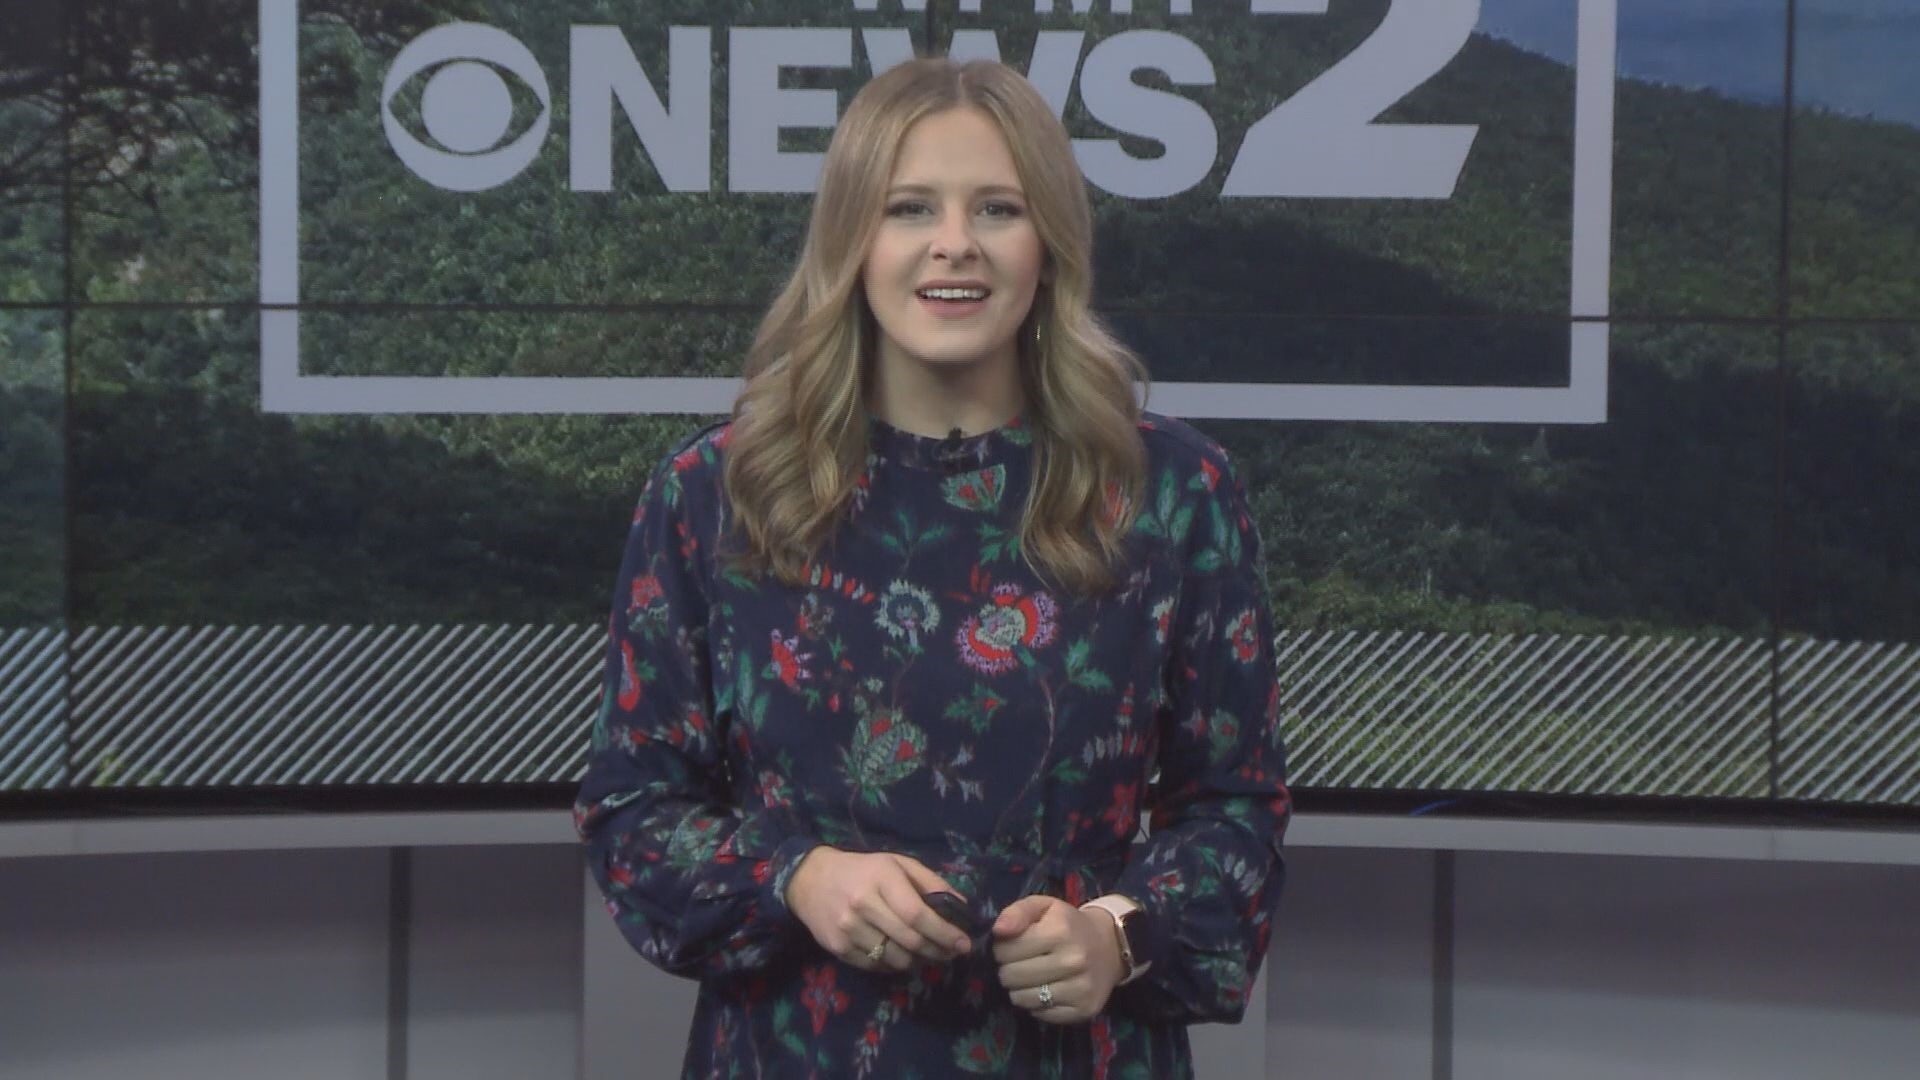 Stacey Spivey gives her ‘2 cents’ on making new year’s resolutions and keeping them.